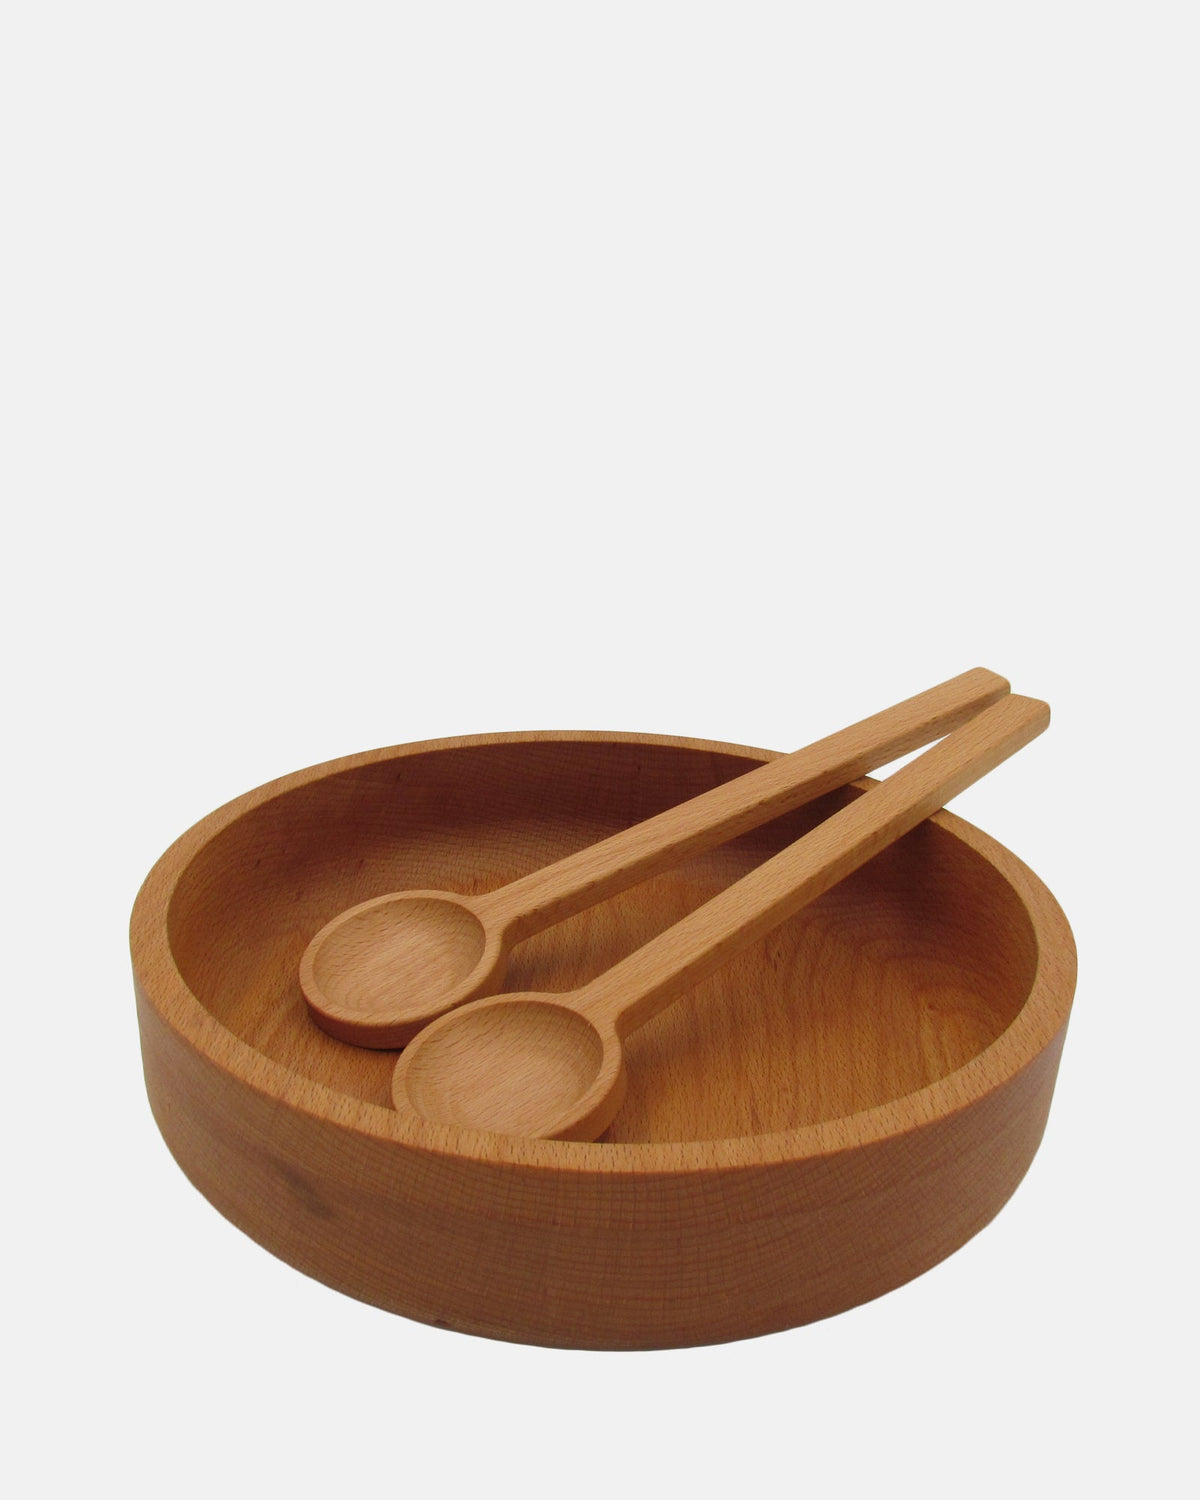 Large Wooden Salad Bowl with 2 Serving Spoons - BRIT LOCKER